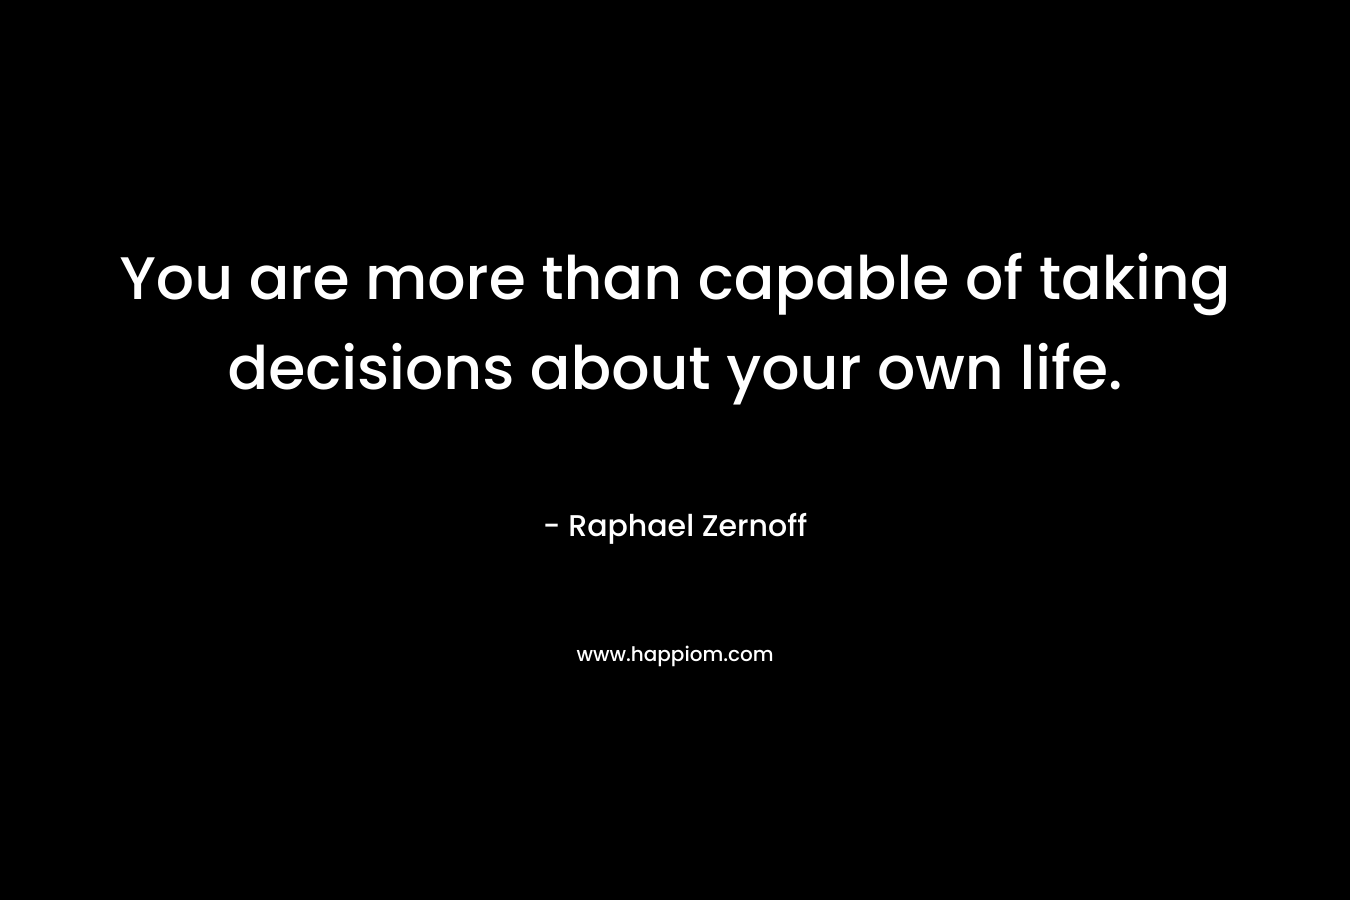 You are more than capable of taking decisions about your own life. – Raphael Zernoff